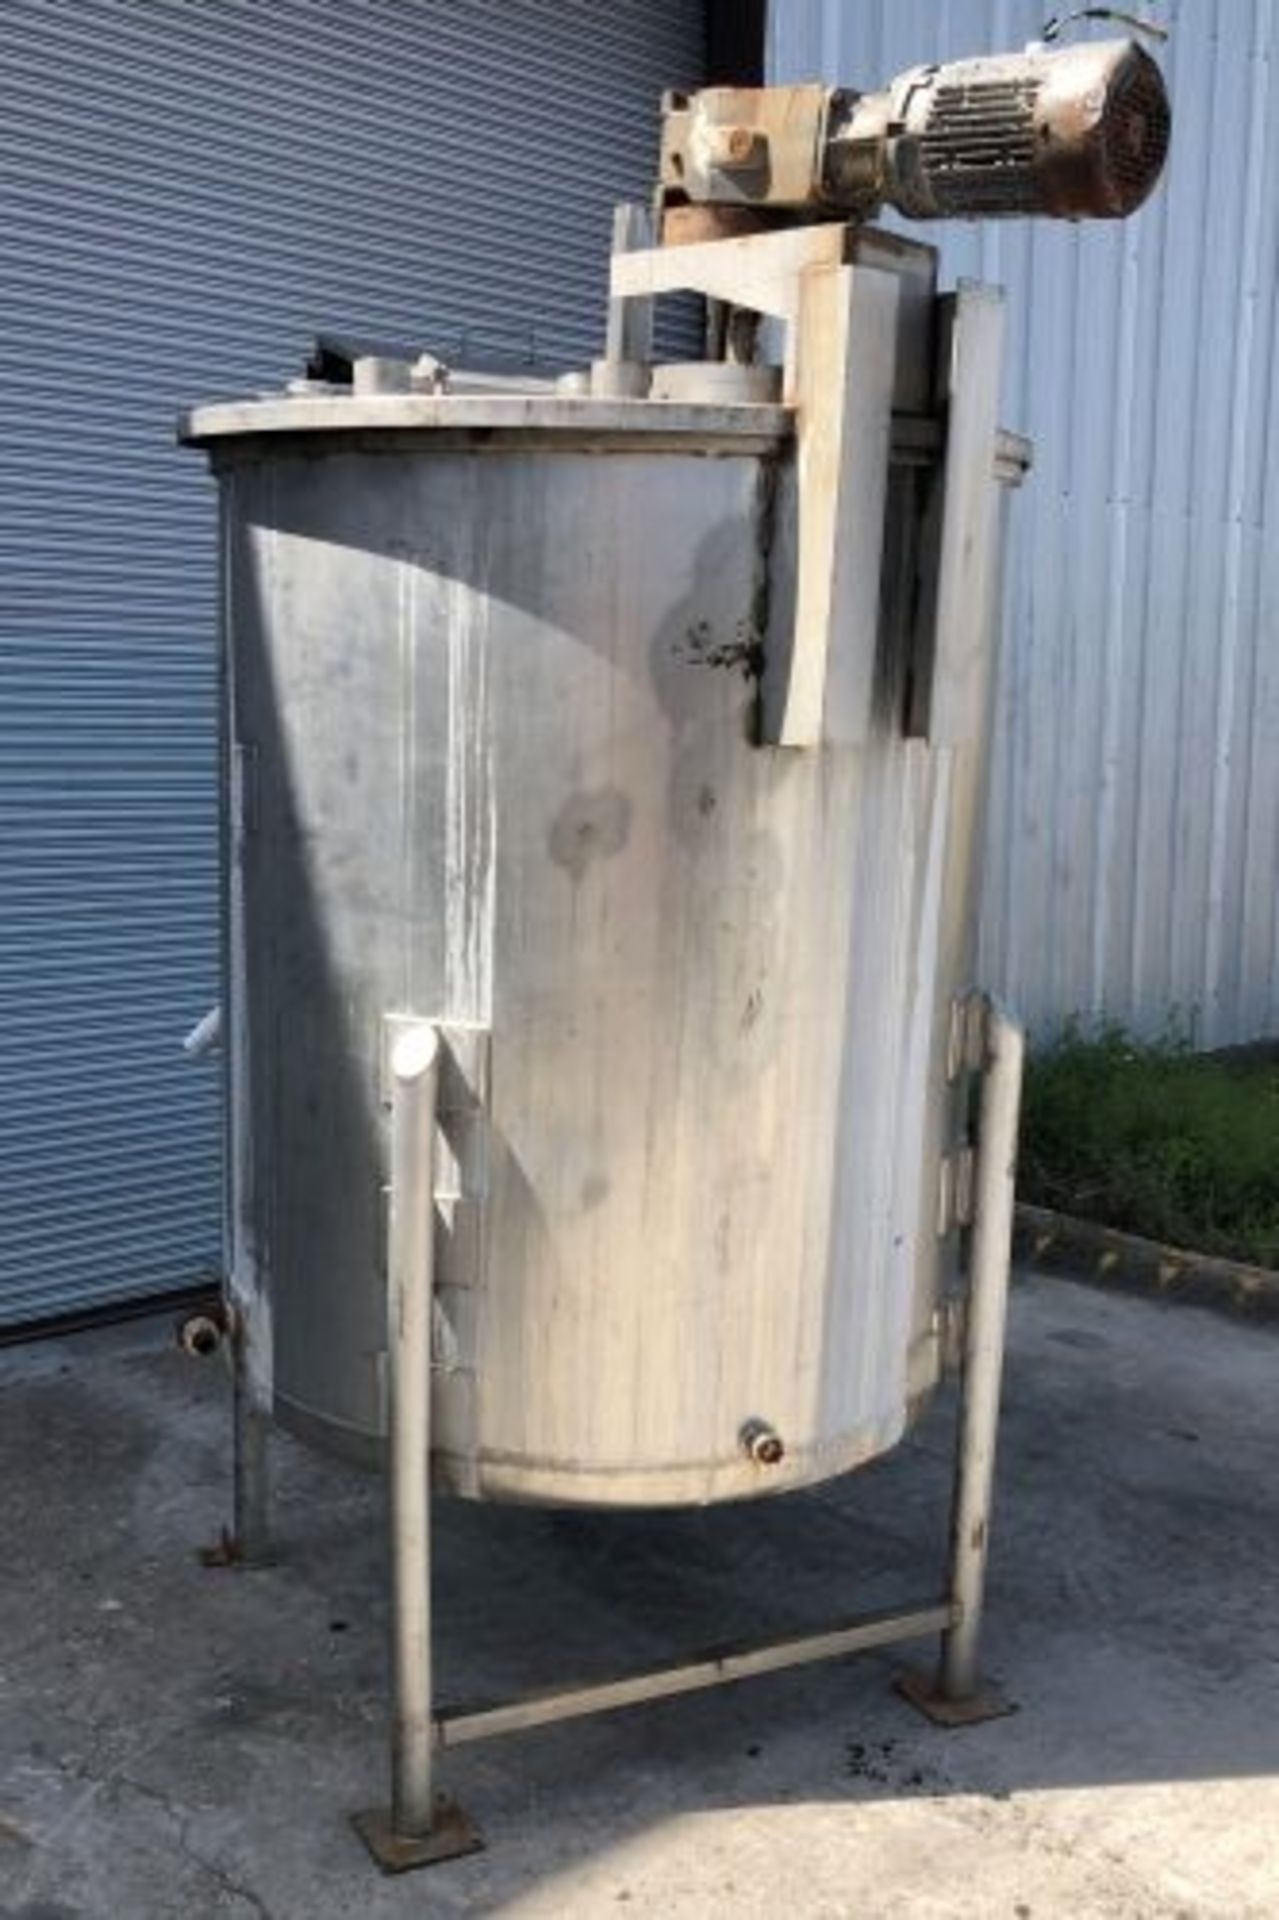 400 gallon stainless steel tank with mixer